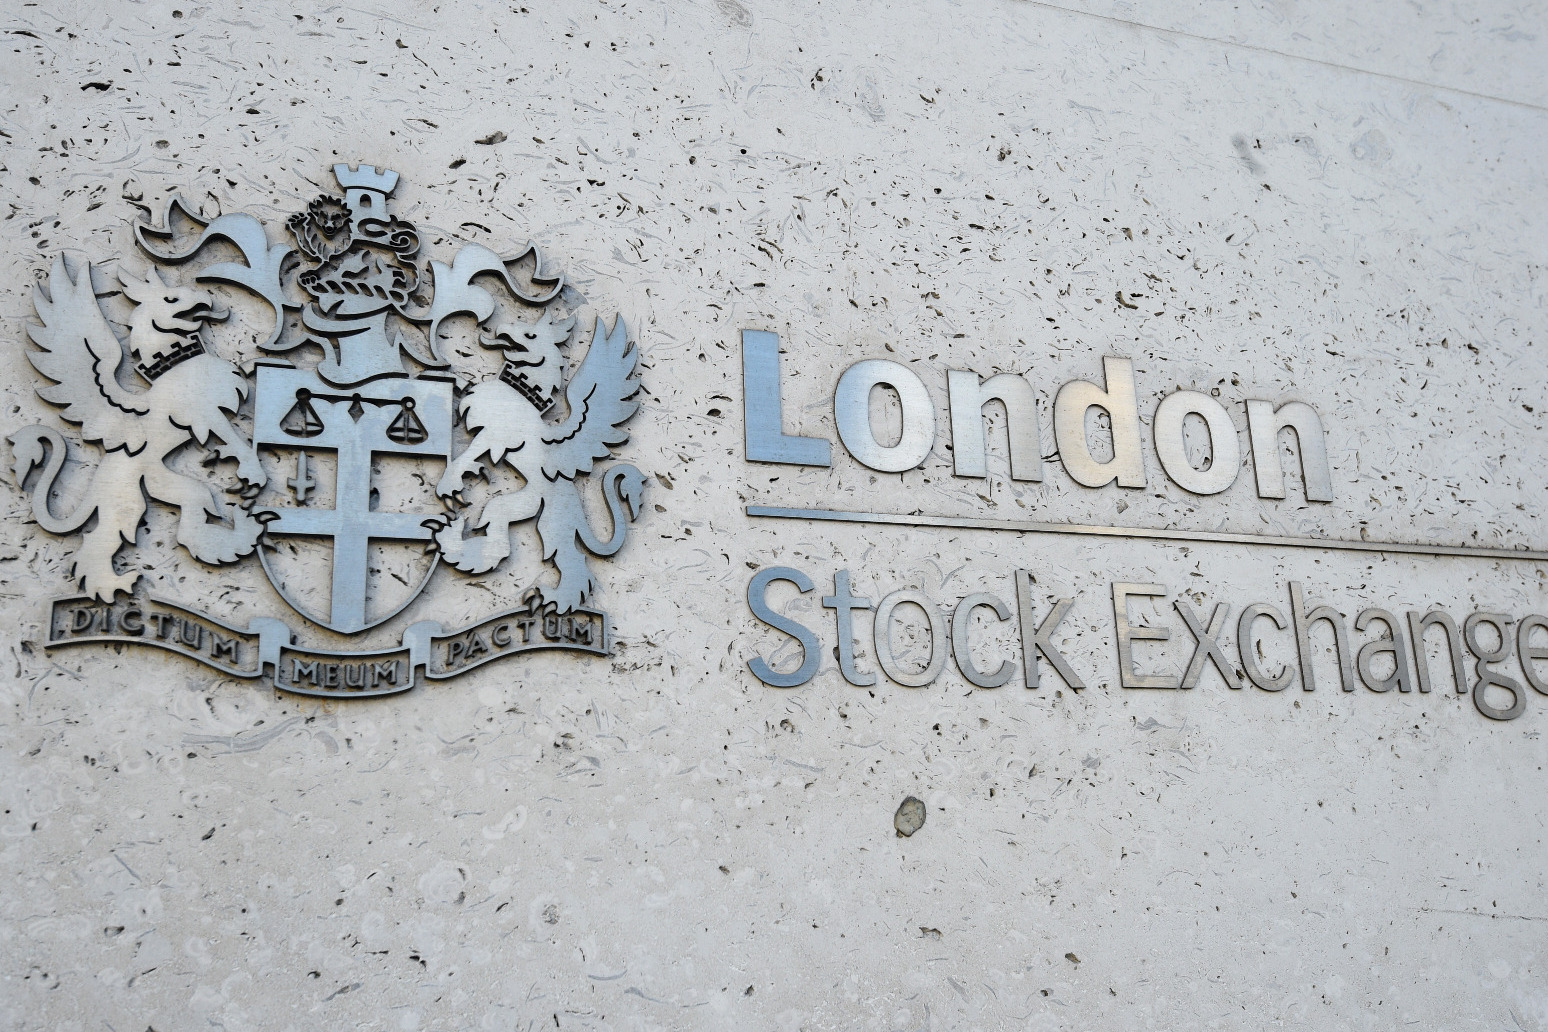 More than £50bn wiped off FTSE 100 in Monday trading 